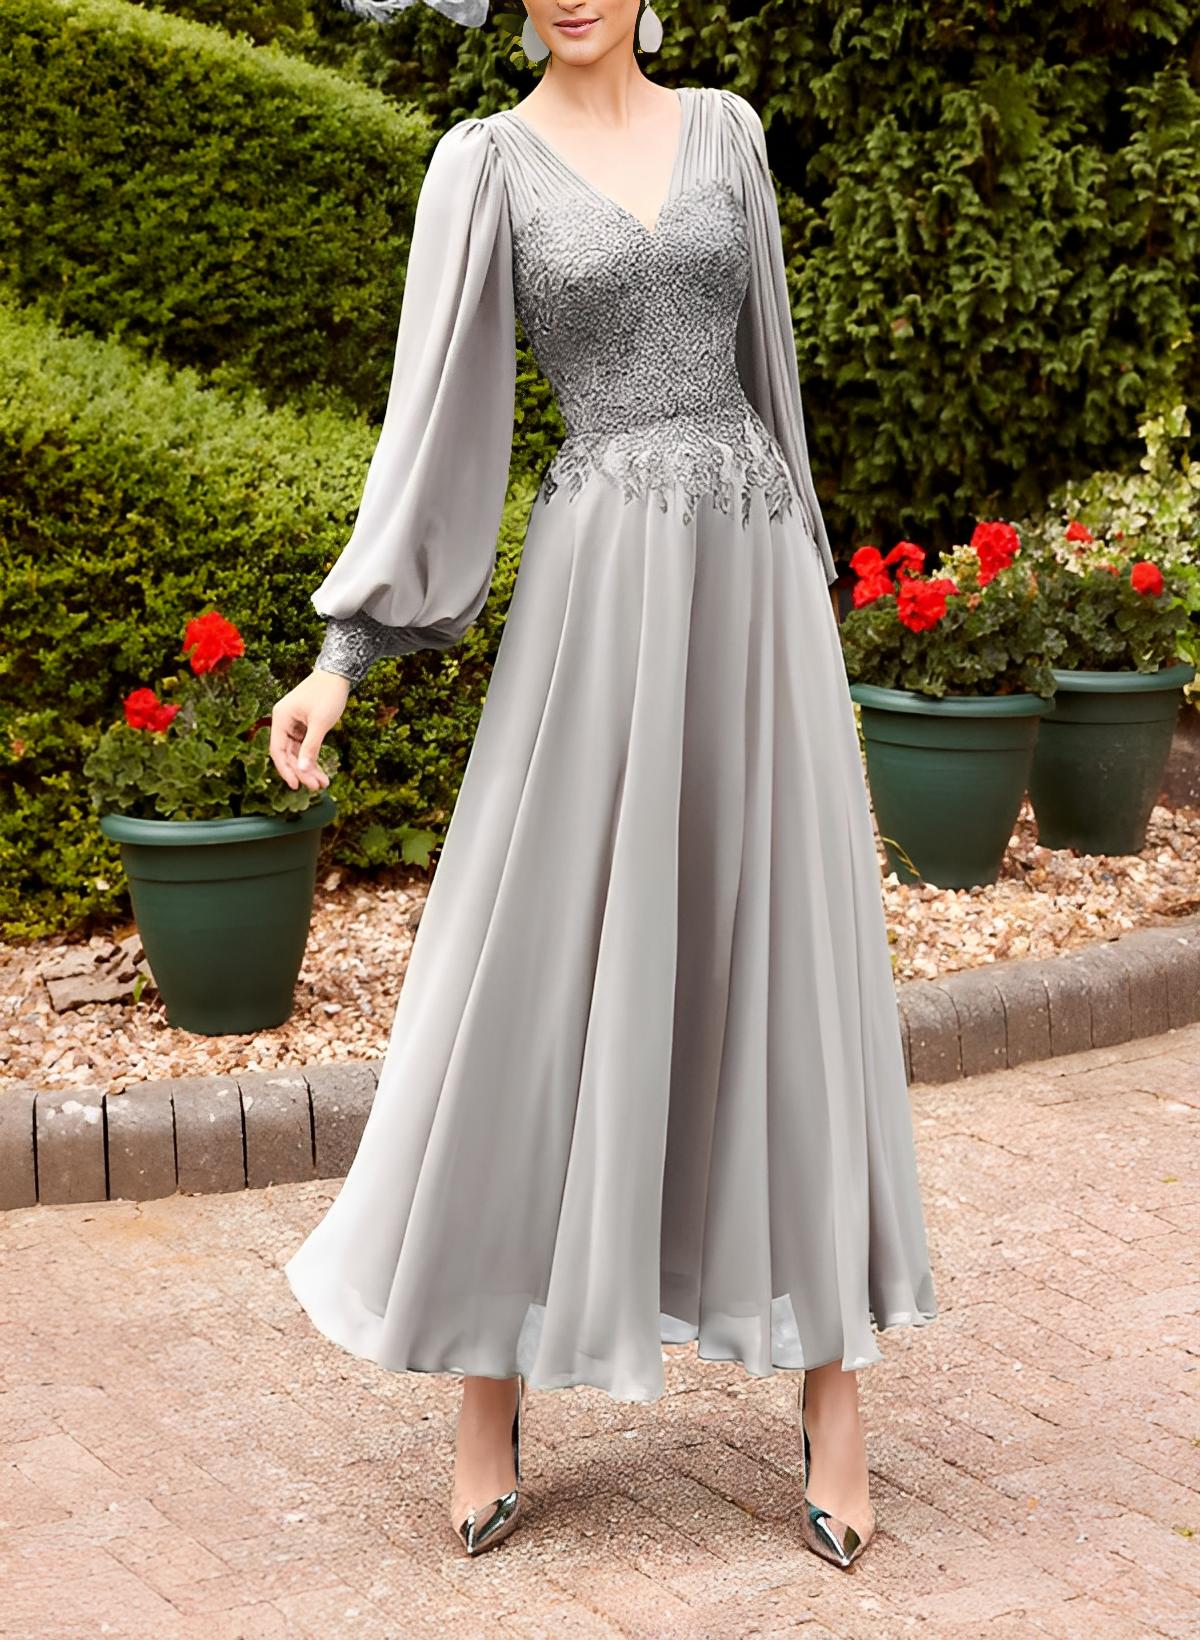 A-Line V-Neck Long Sleeves Ankle-Length Chiffon/Lace Mother Of The Bride Dresses With Appliques Lace